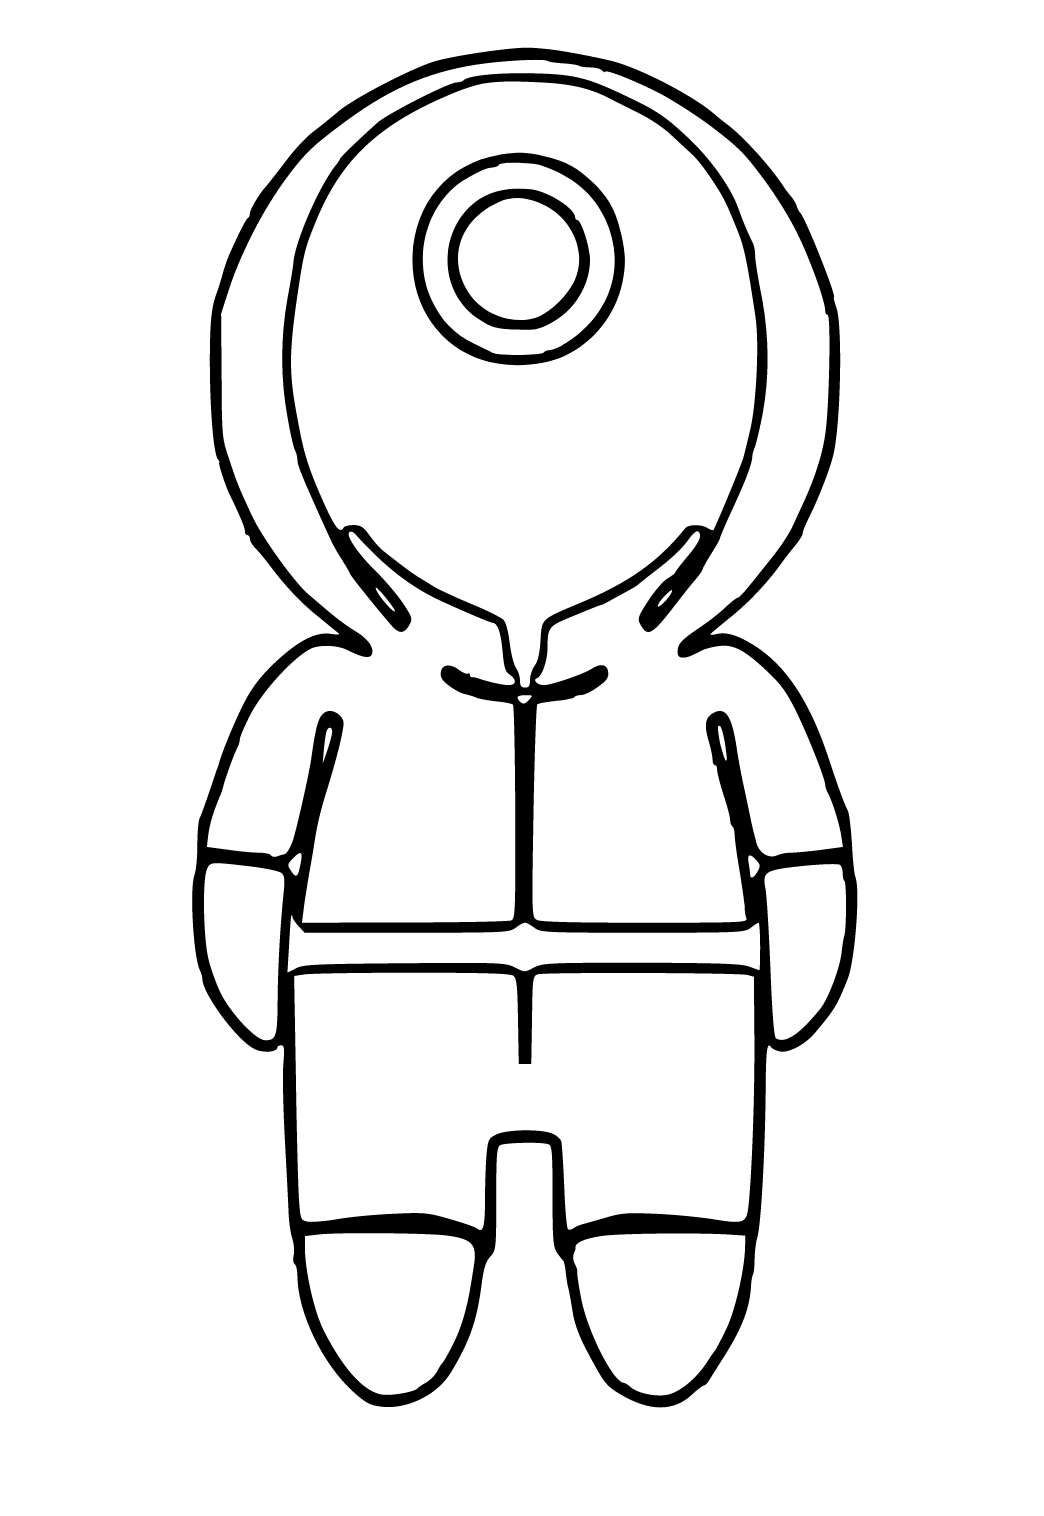 Free printable squid game character coloring page for adults and kids